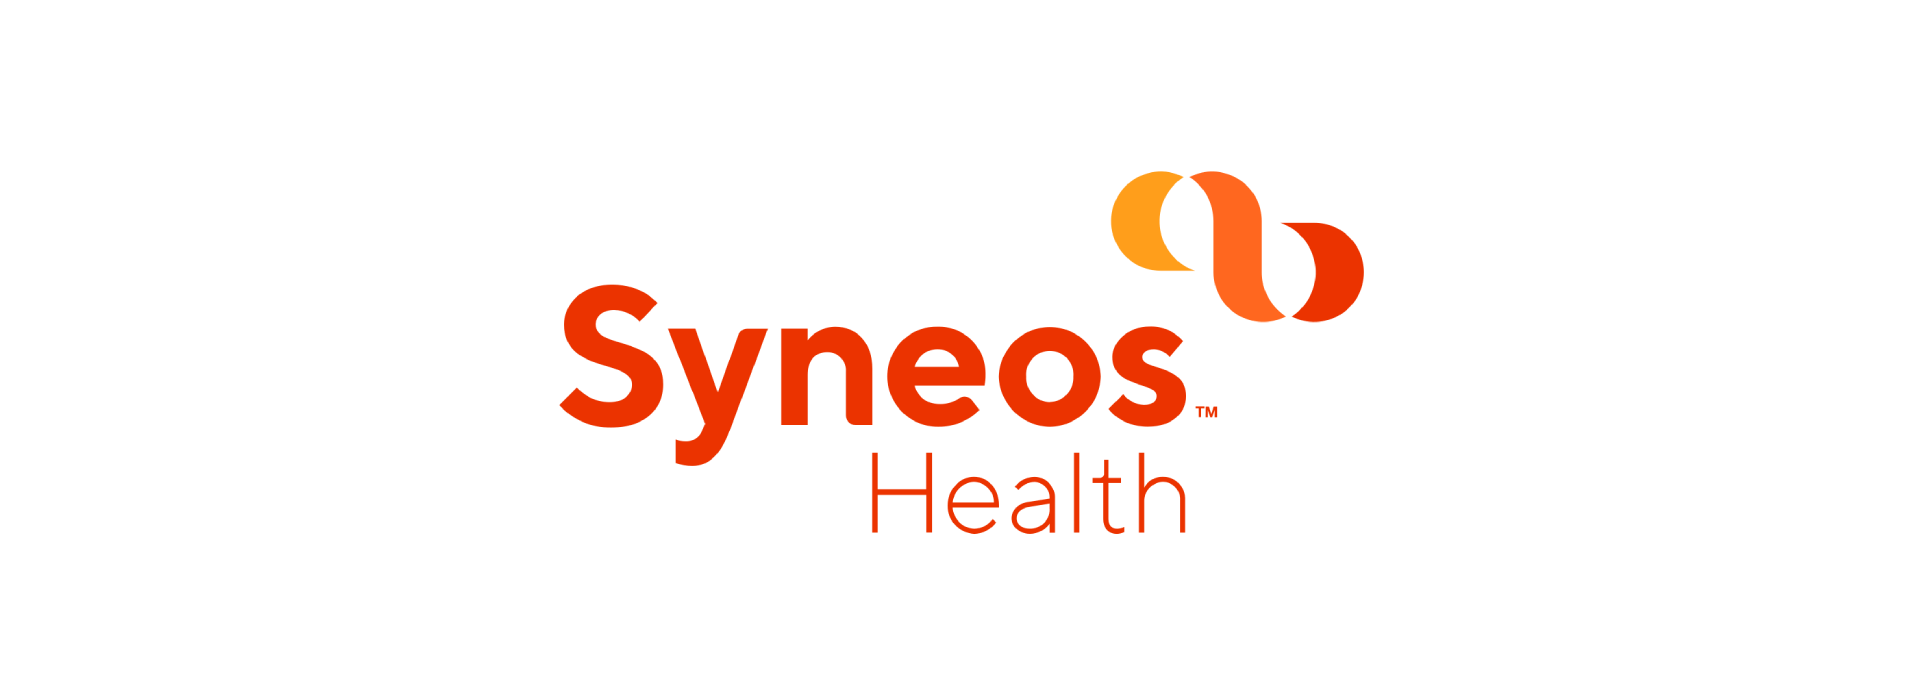 SYNEOS HEALTH SELECTS ORACLE CLOUD